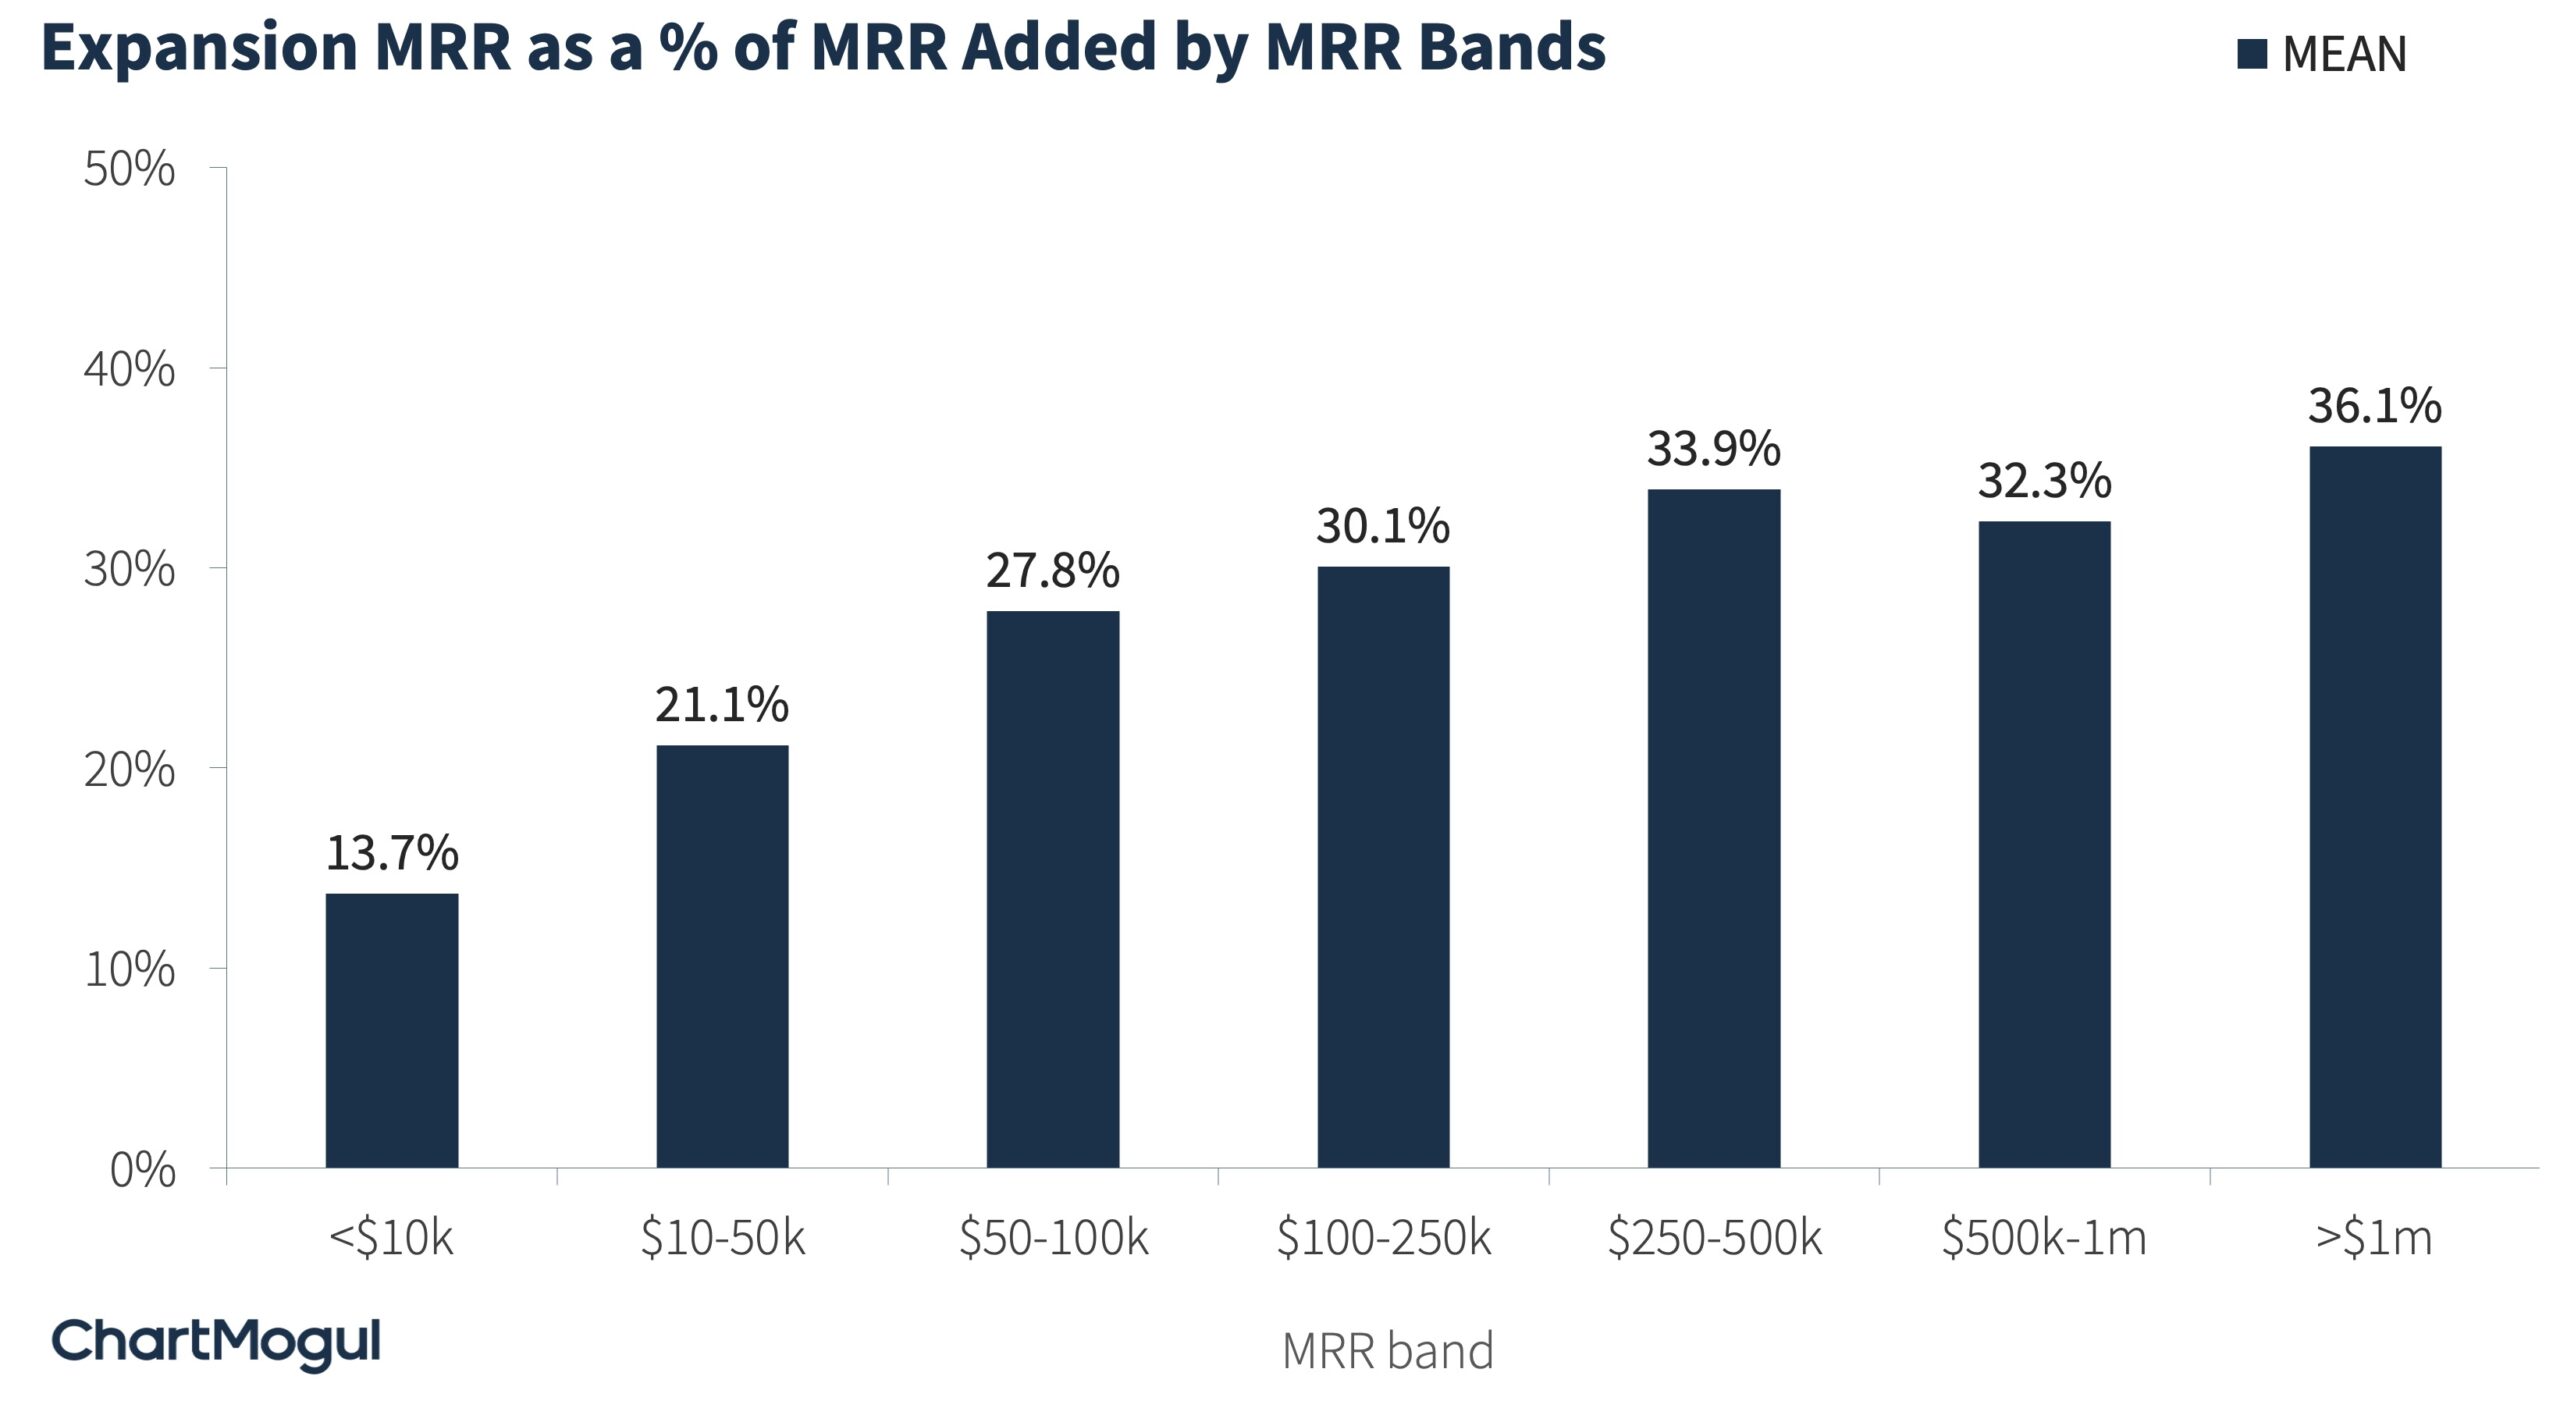 Expansion MRR as a % of MRR Added